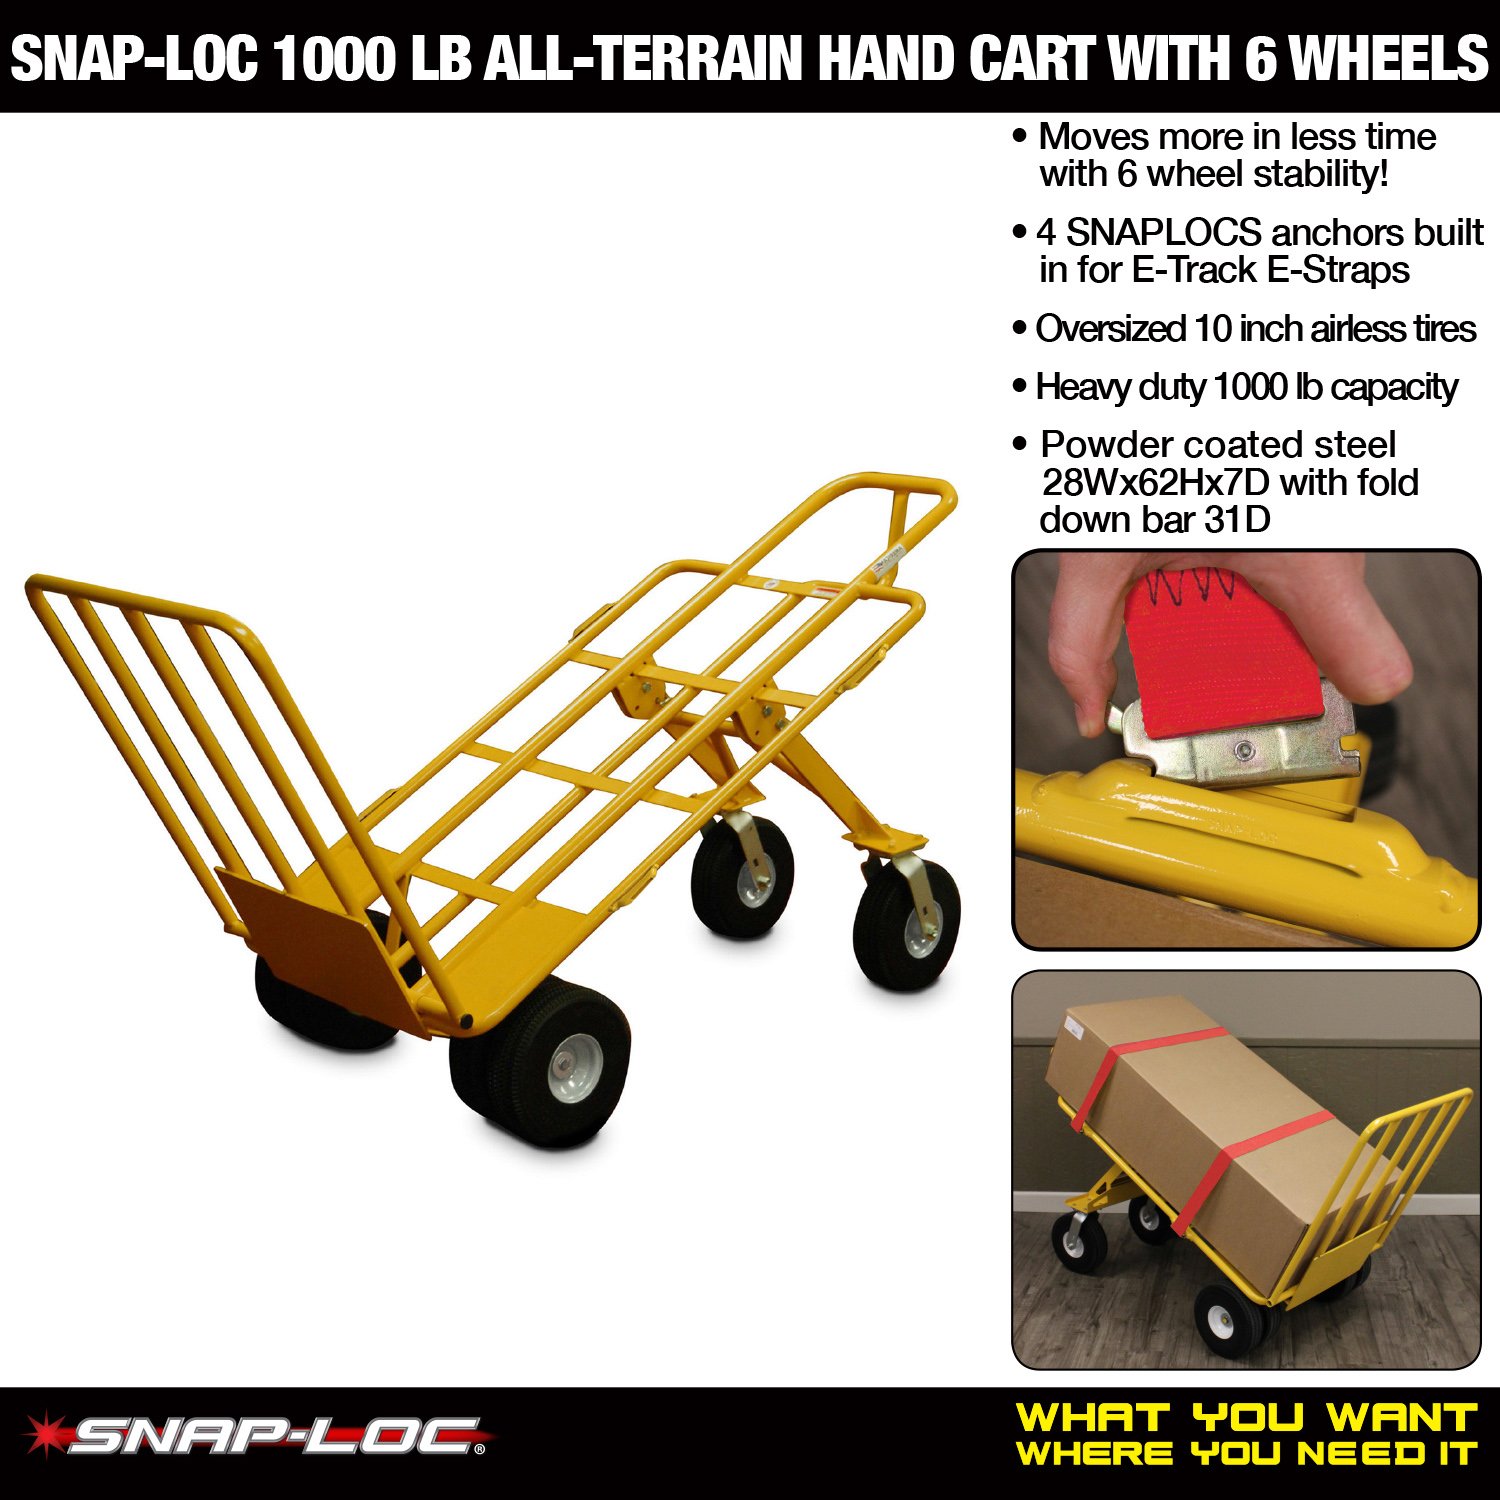 All-Terrain Hand CART 6 Wheel with 1000 lb Capacity and 10 inch Airless Wheels